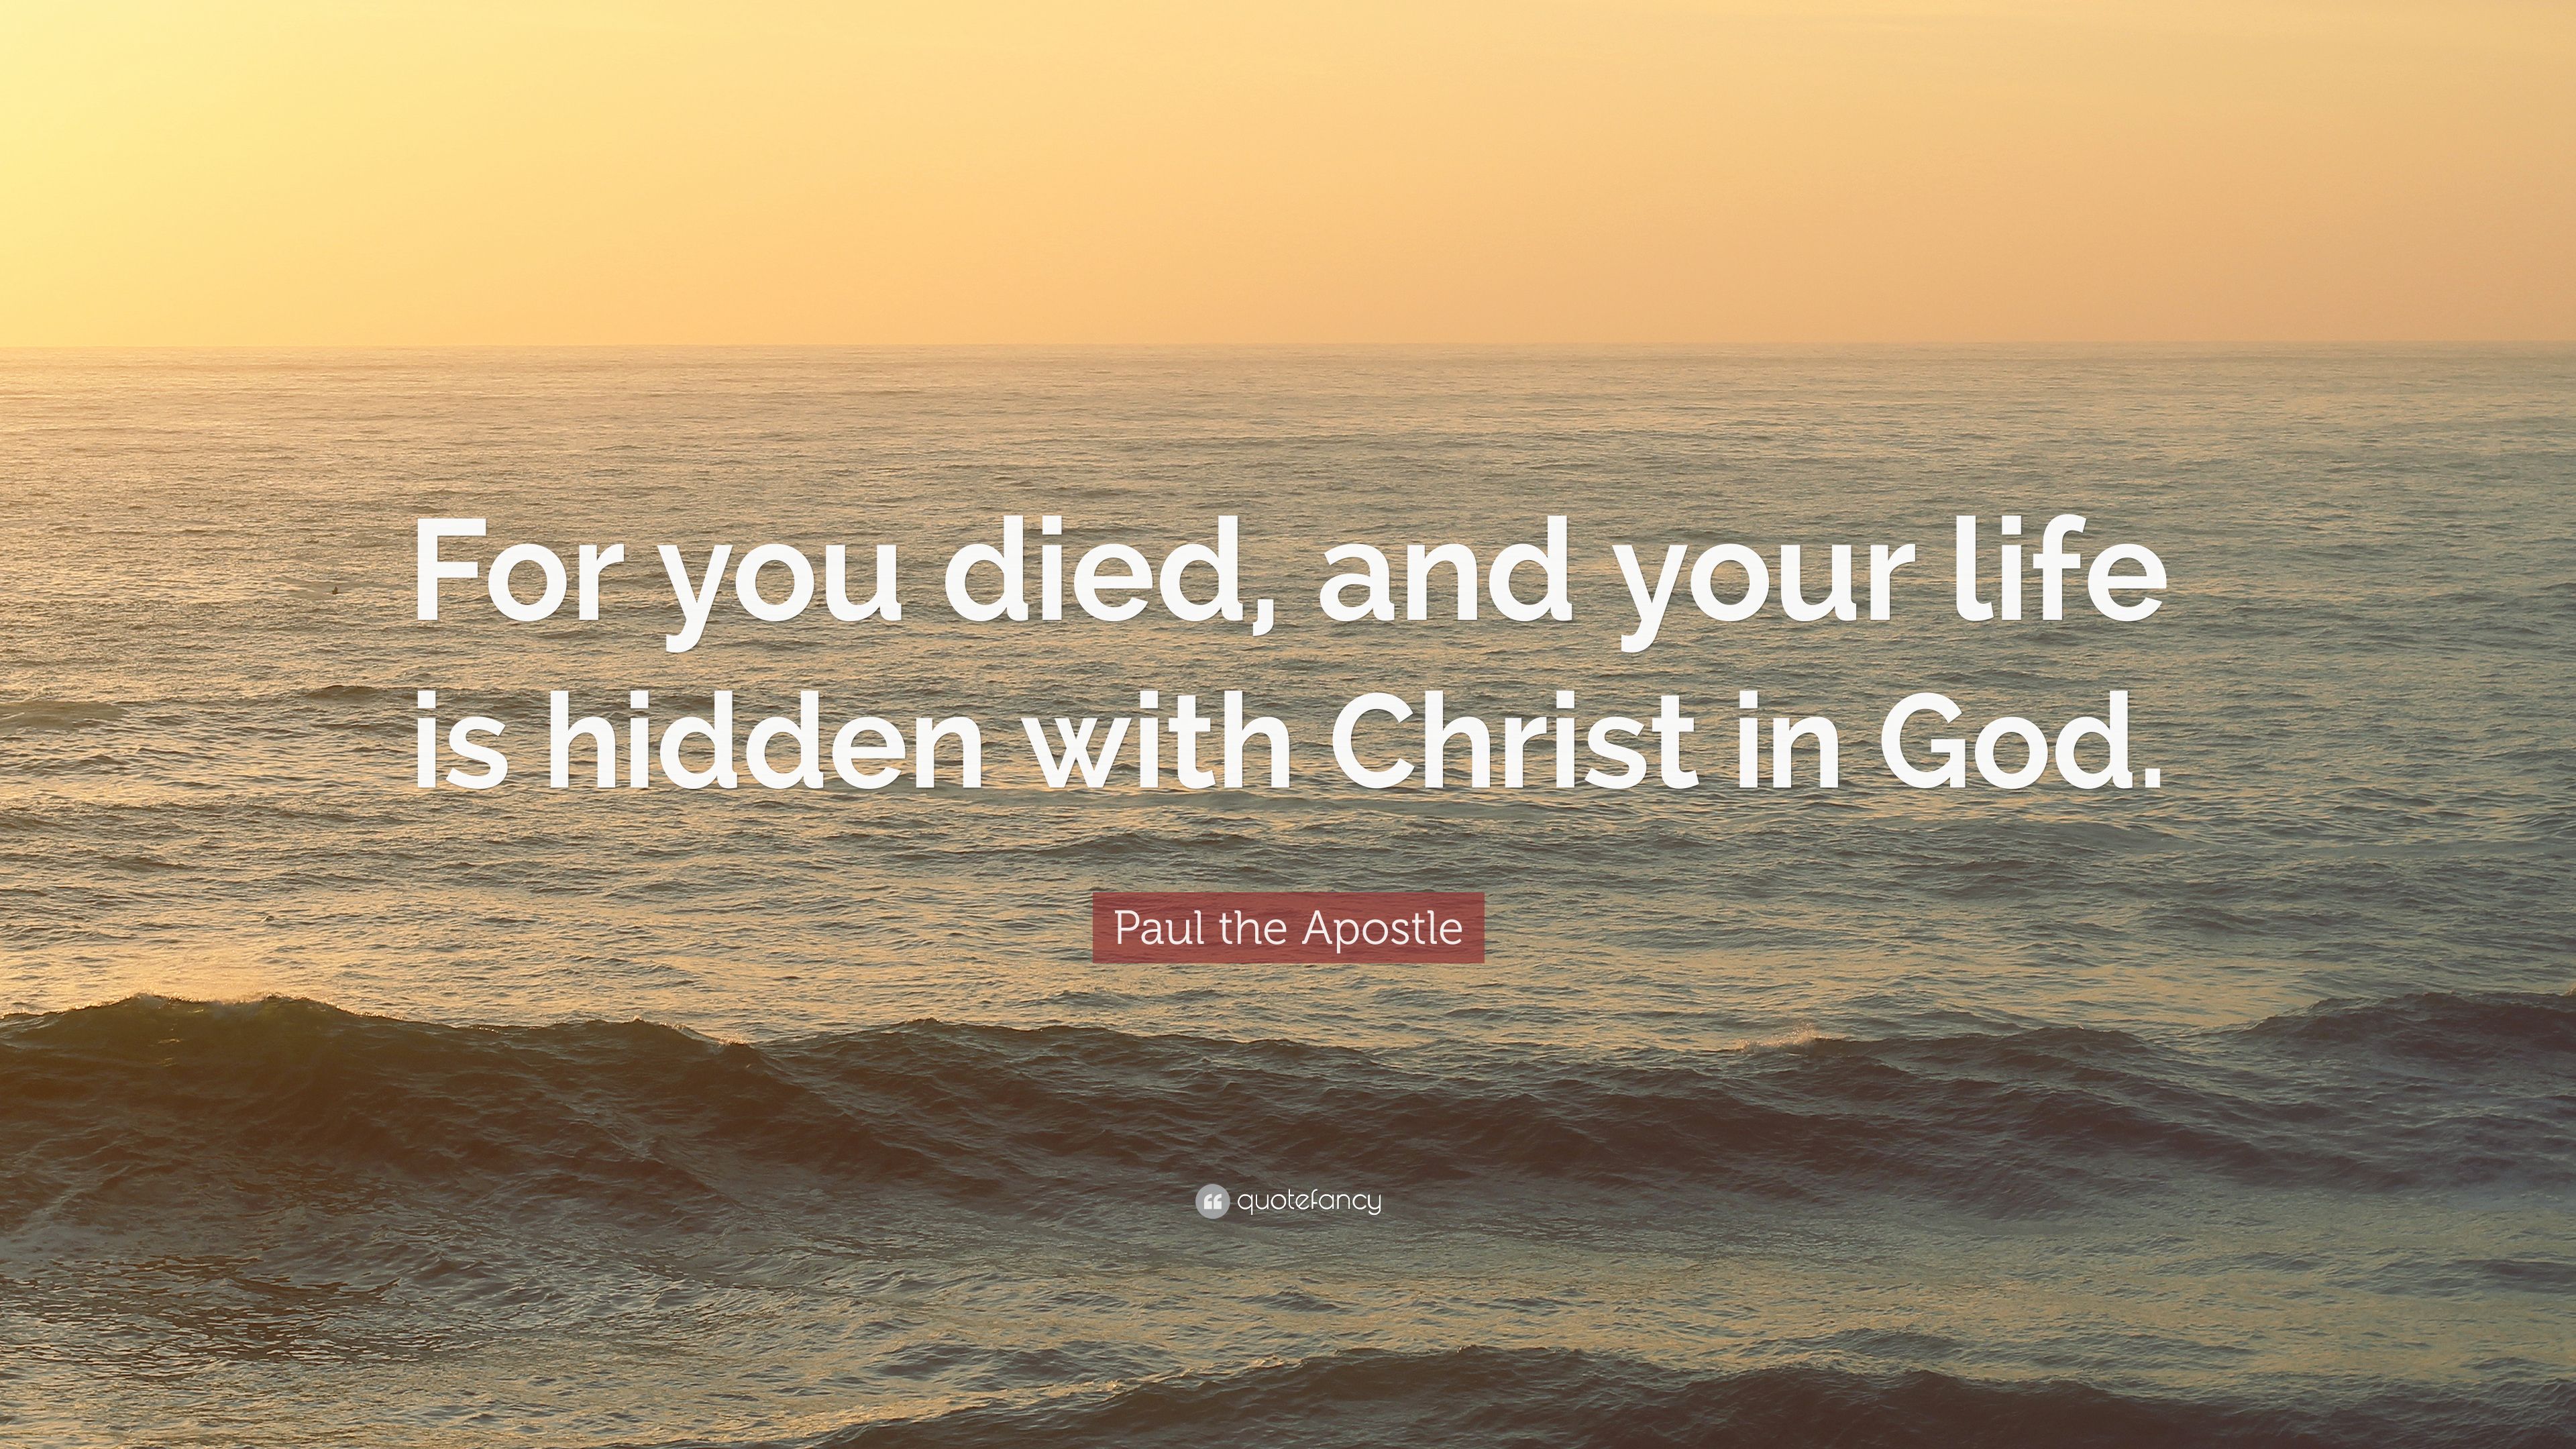 Paul the Apostle Quote: “For you died, and your life is hidden